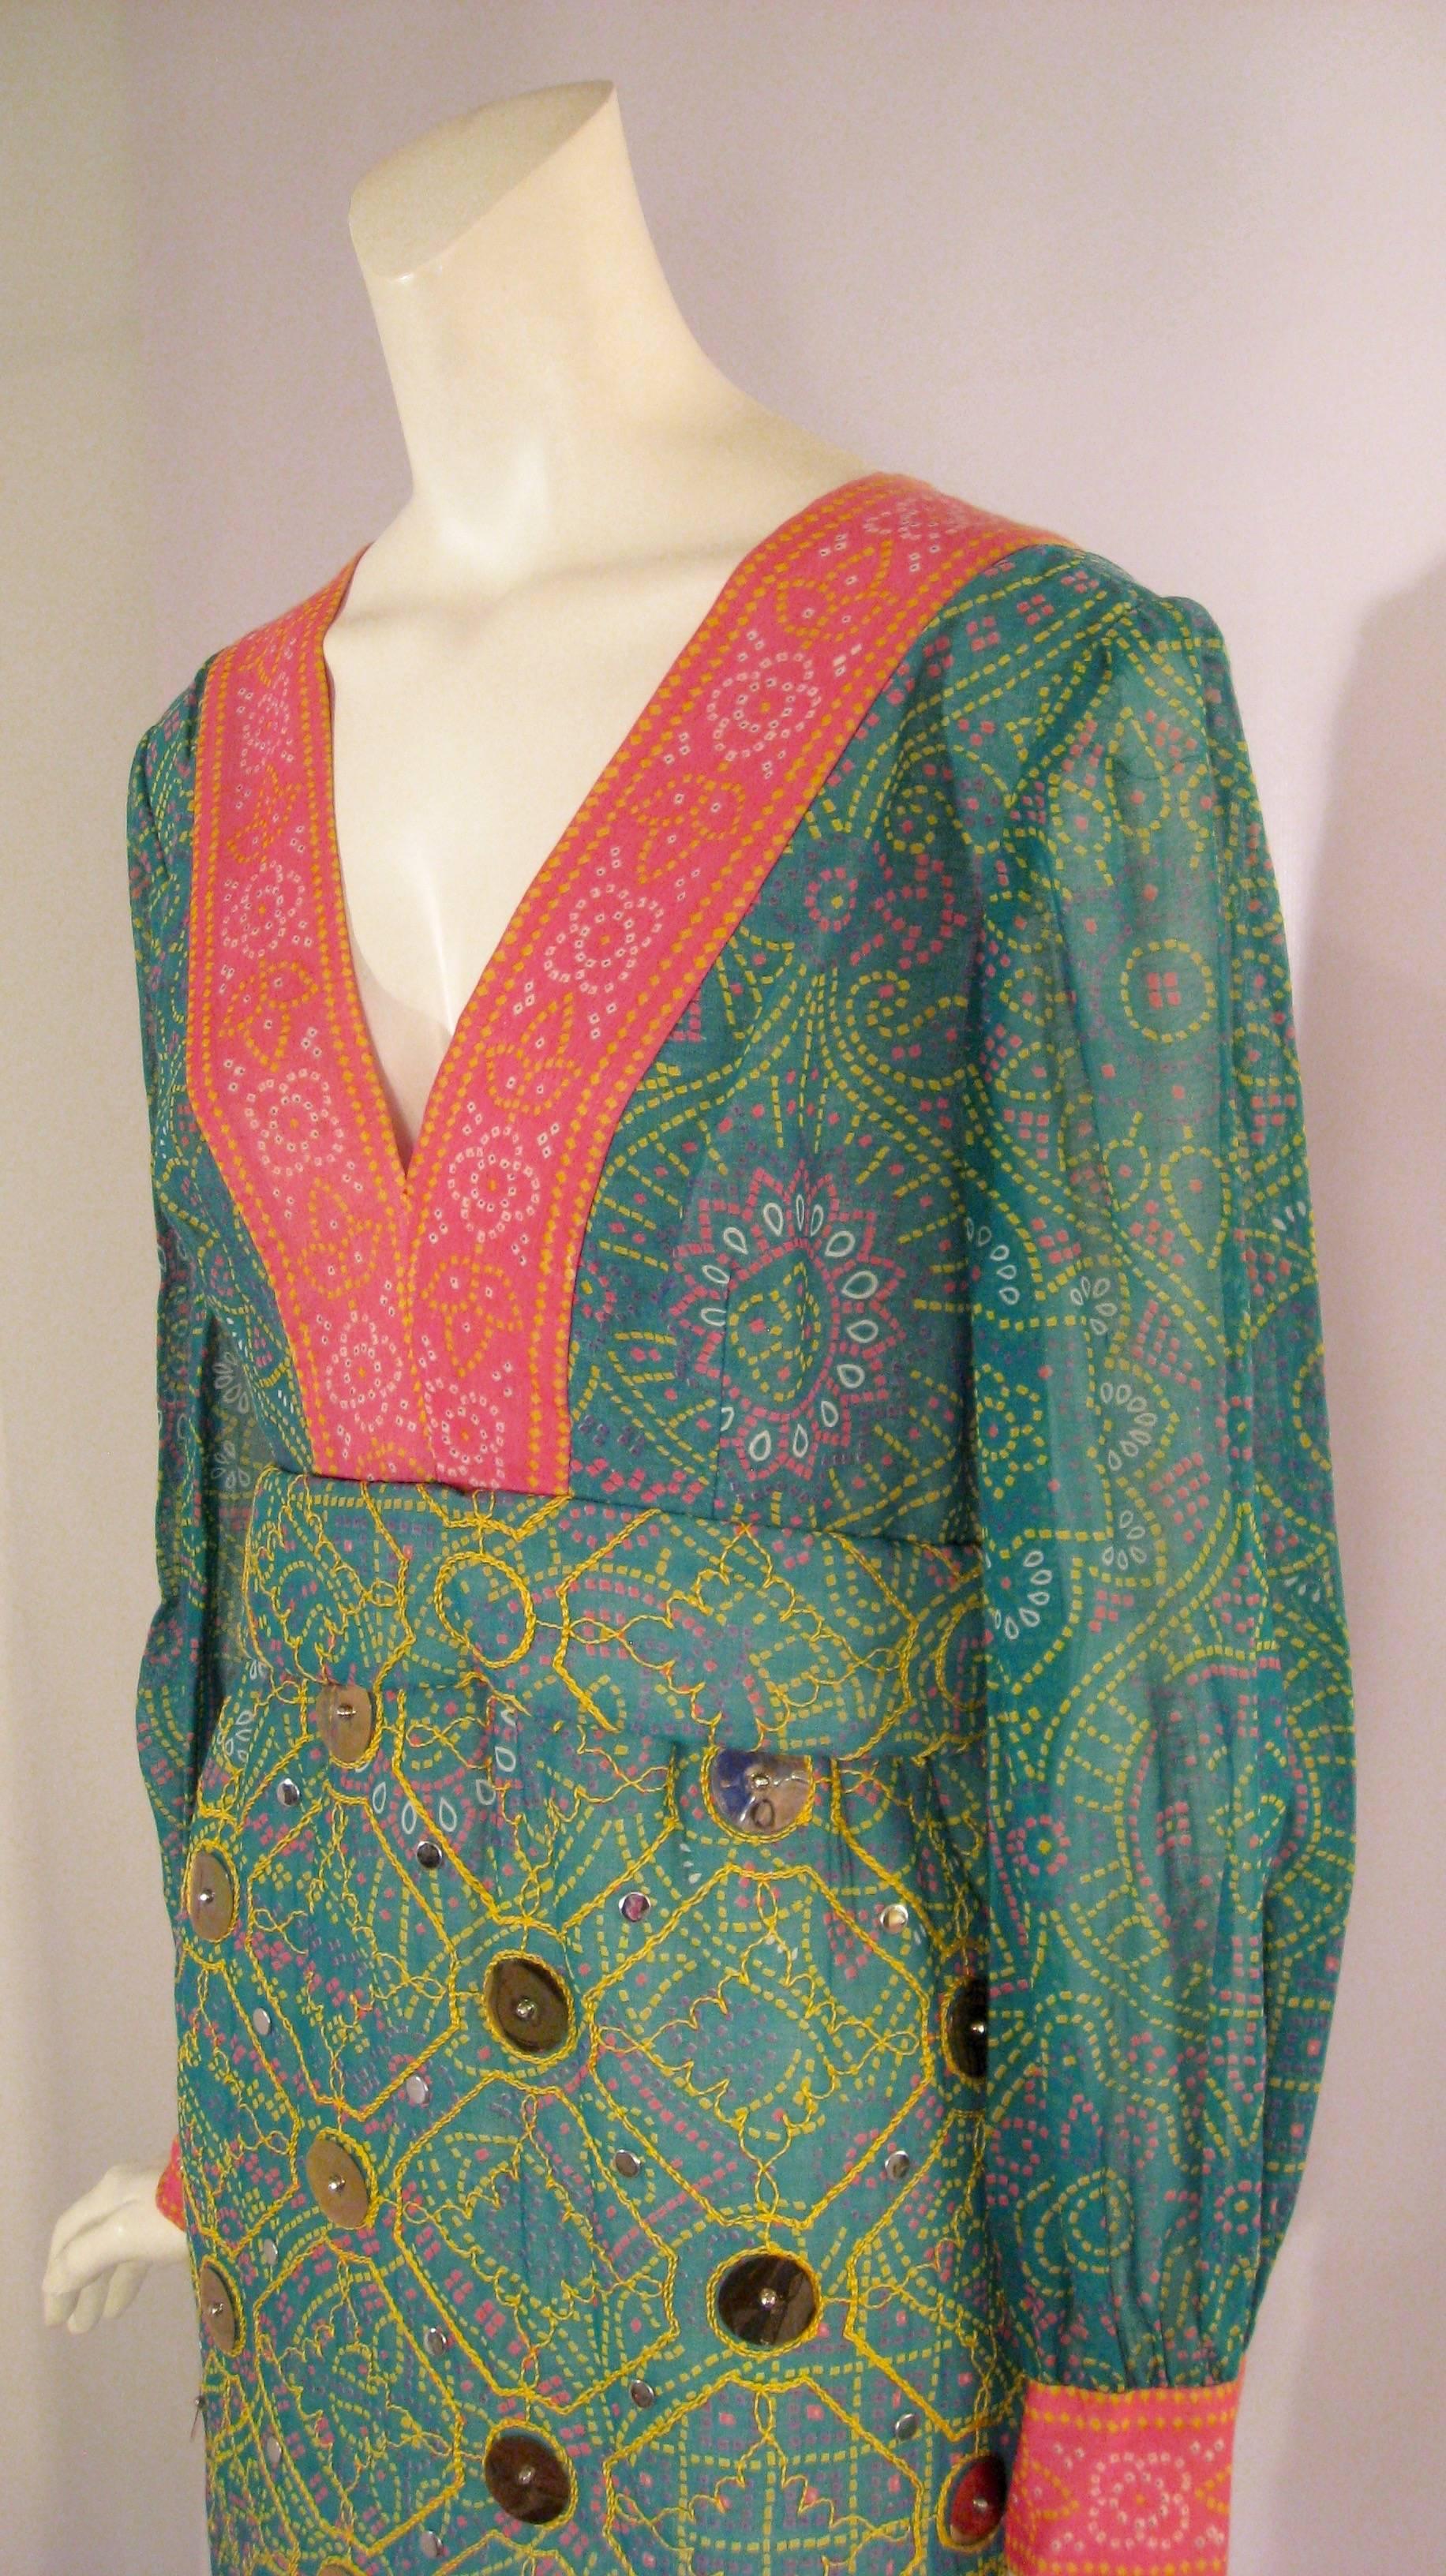 Gorgeous 1970s dress in an ethnic print. The main color is a tealy green with pink, yellow, white and purple printing. The cuffs, neck and border bottom are a hot pink with yellow, white and green printing. The A line skirt is quilted and interlined